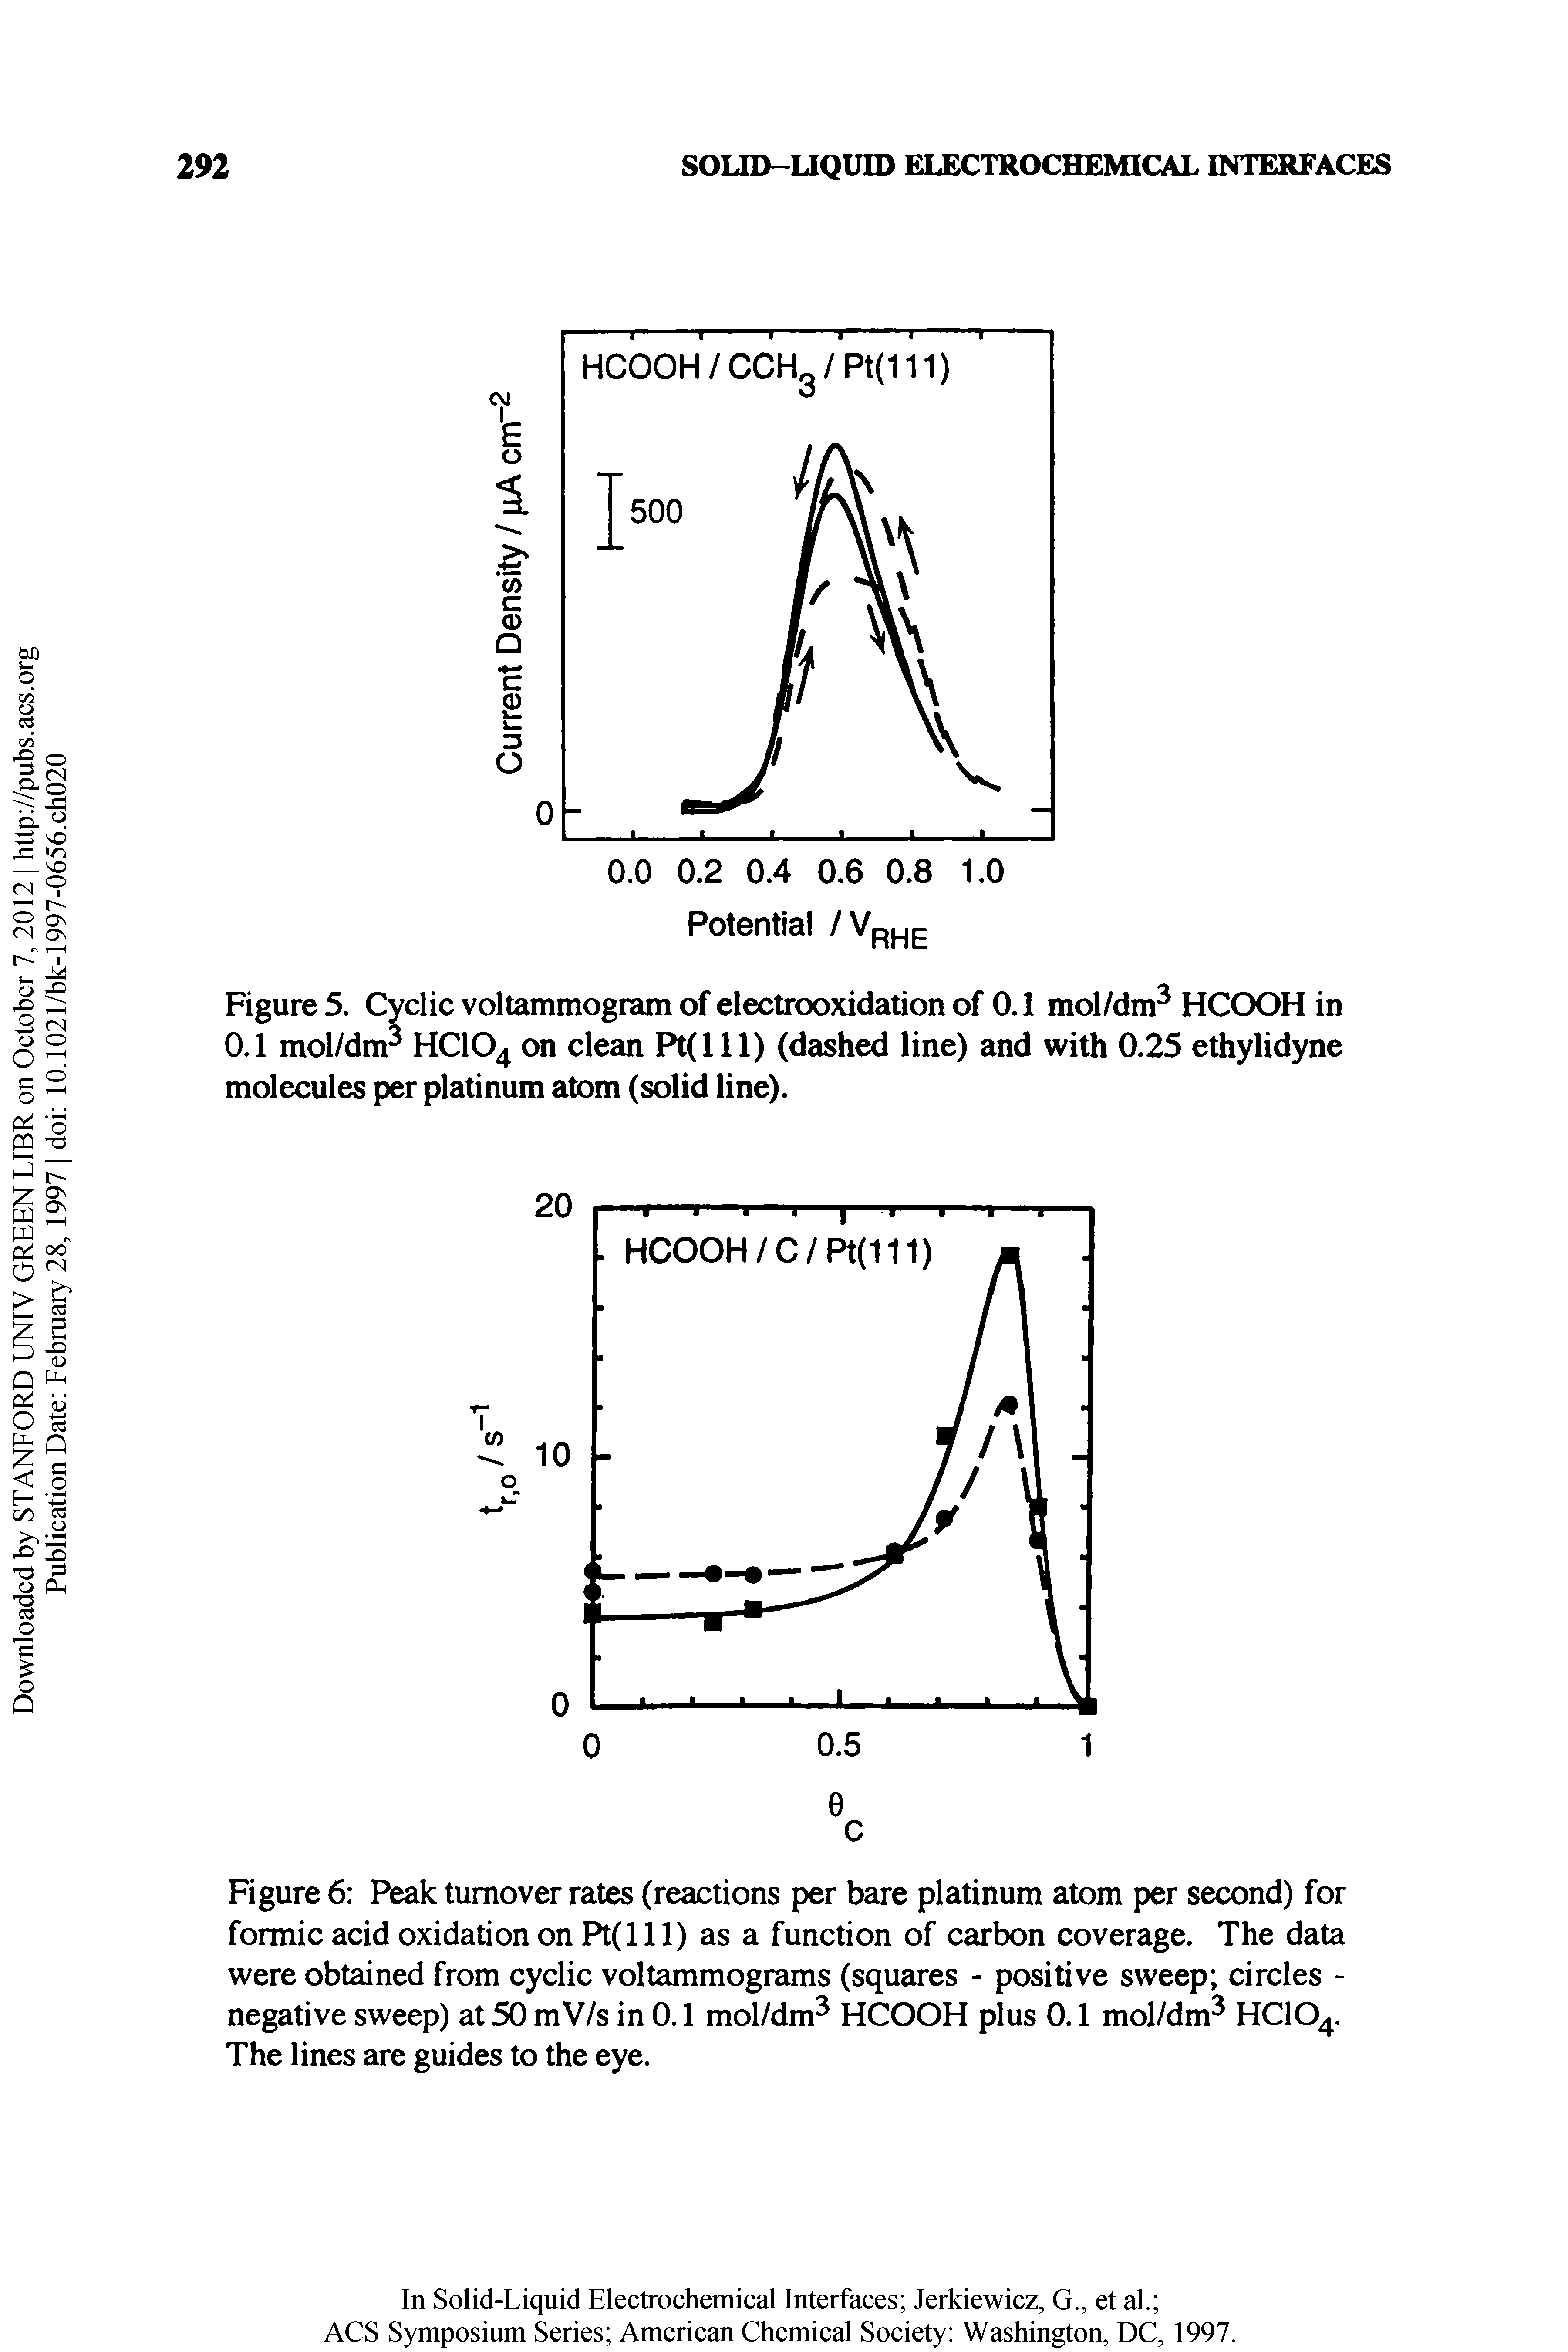 Figure 6 Peak turnover rates (reactions per bare platinum atom per second) for formic acid oxidation on Pt(lll) as a function of carbon coverage. The data were obtained from cyclic voltammograms (squares - positive sweep circles -negative sweep) at 50 mV/s in 0.1 mol/dm HCOOH plus 0.1 mol/dm HCIO. The lines are guides to the eye.